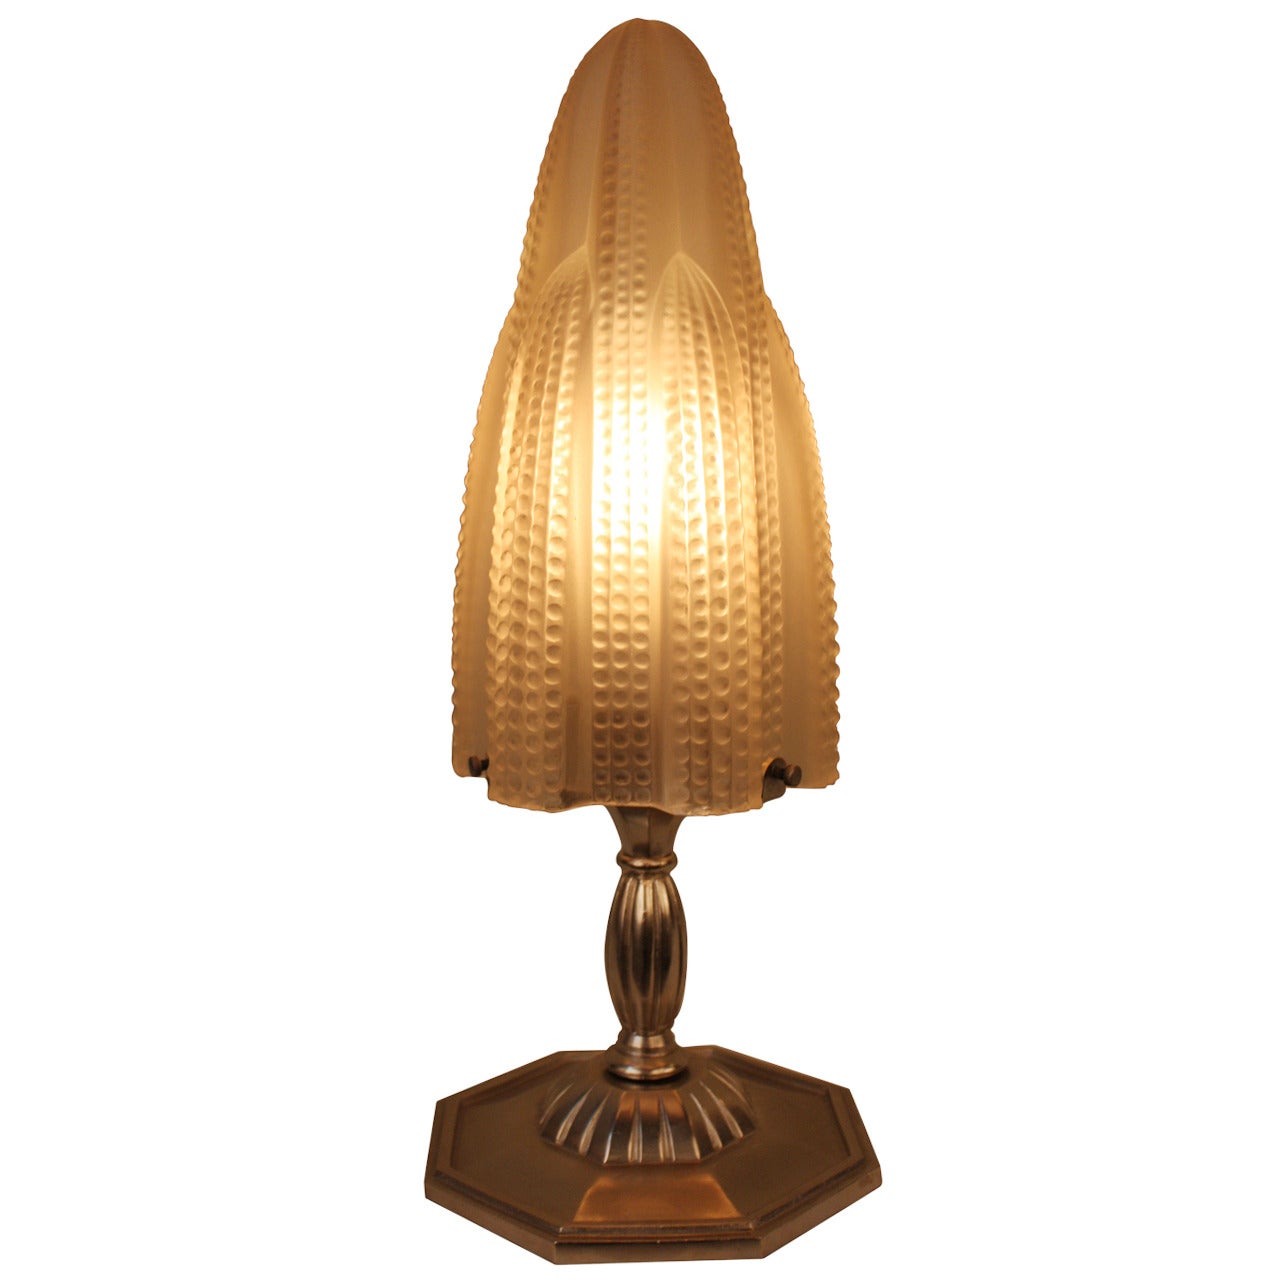 French Art Deco Table Lamp Attributed to Sabino